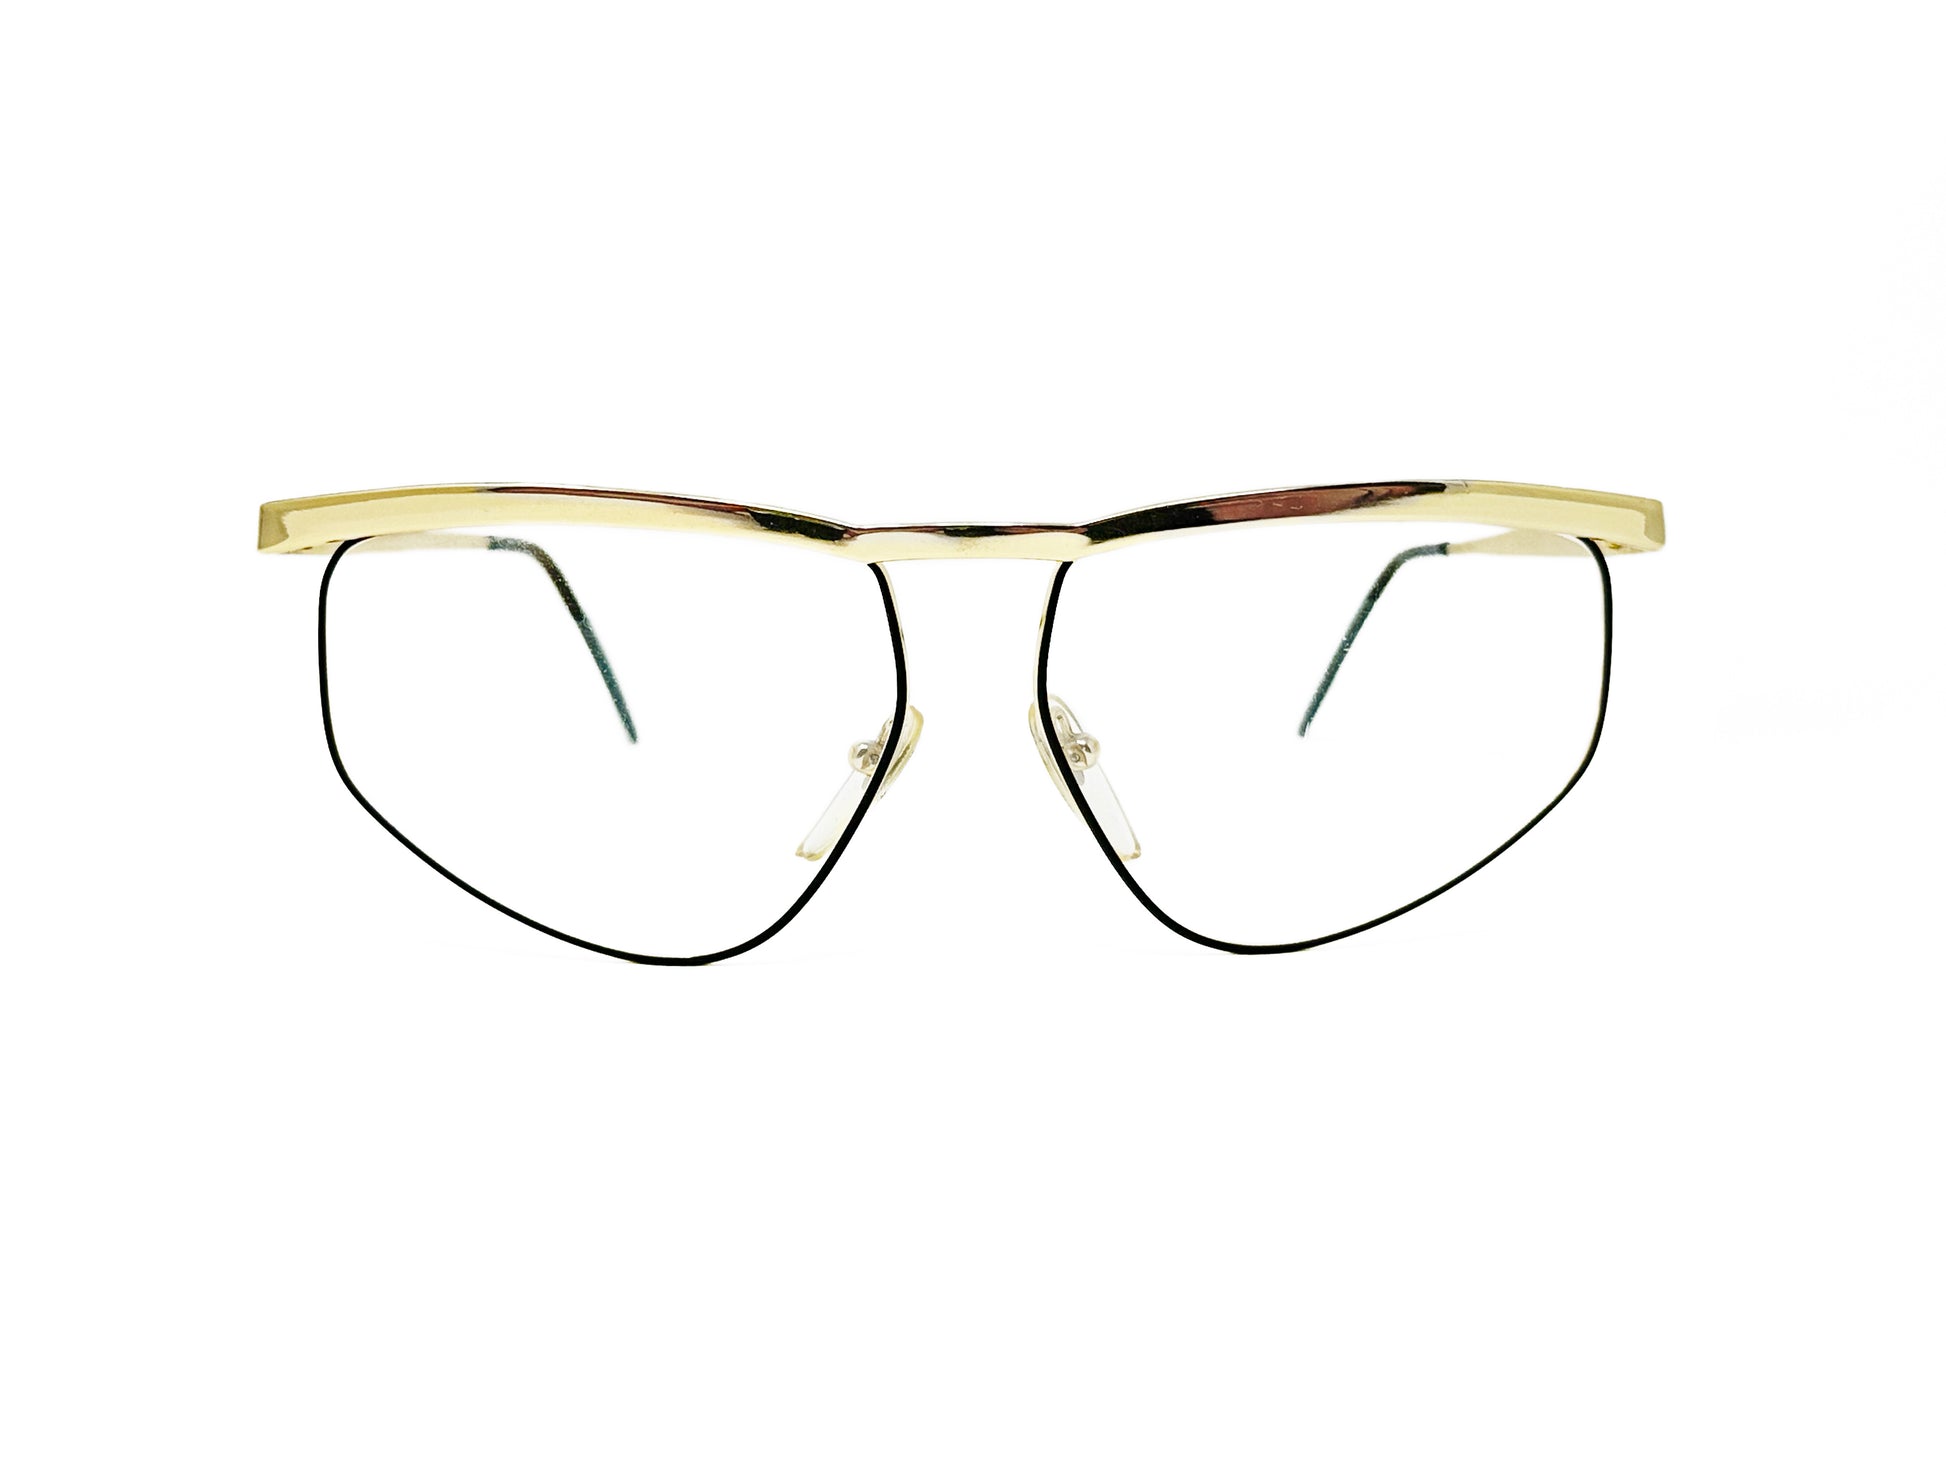 Essence large, geometric, half-rim optical frame with slight flat-top. Model: 01. Color: Gold. Front view.